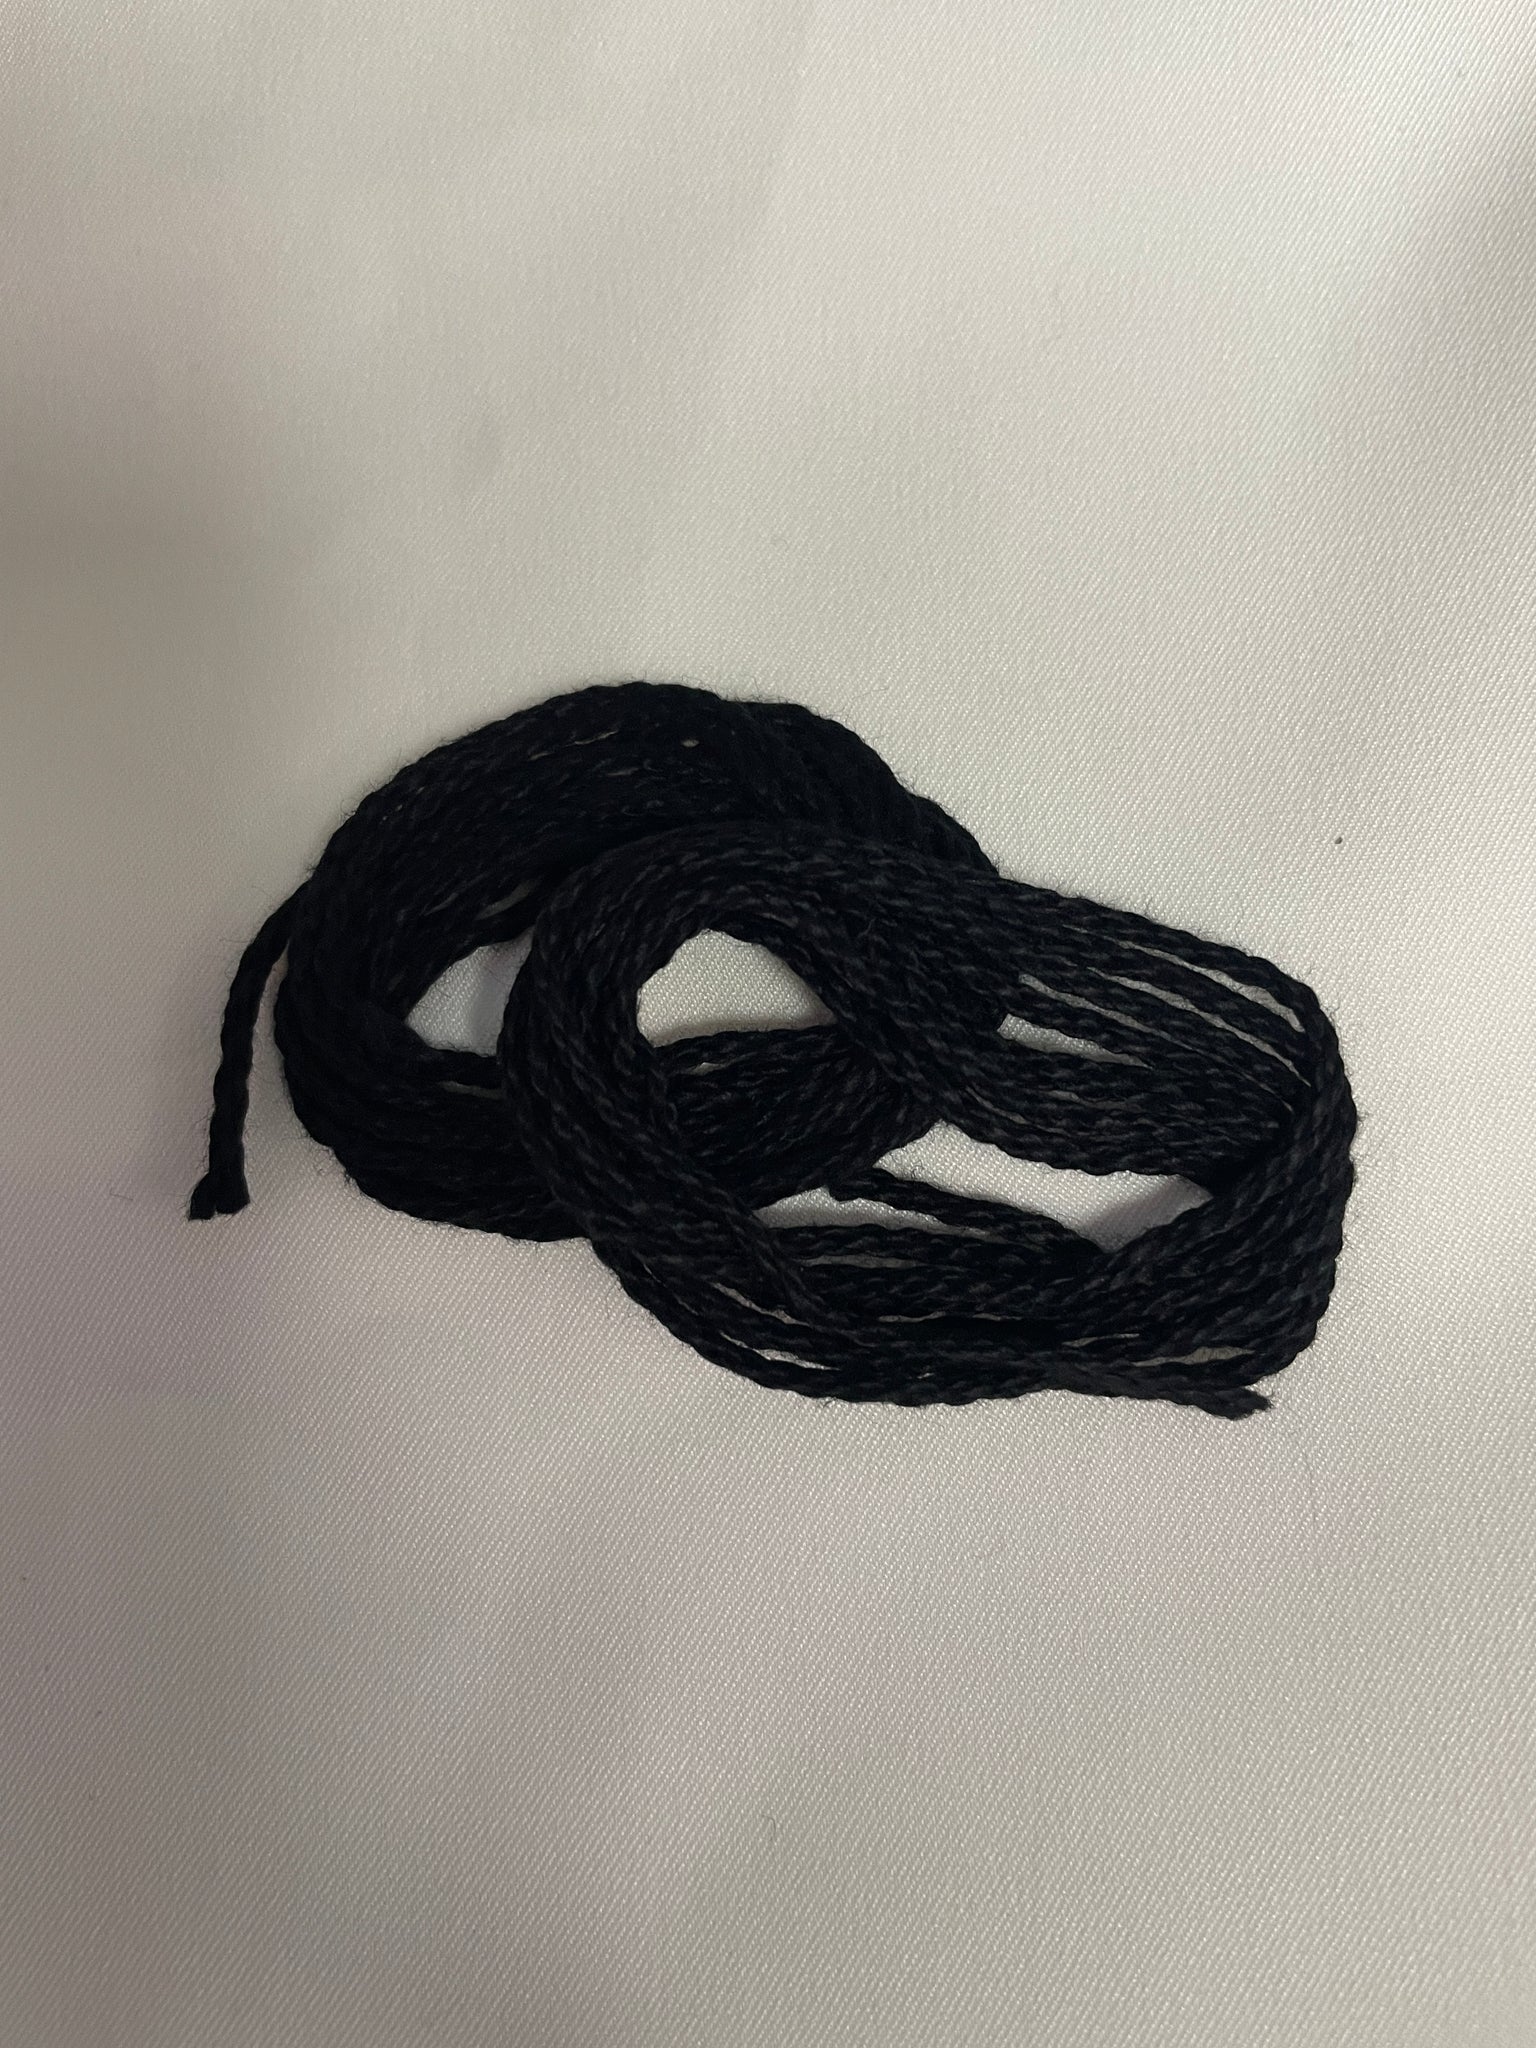 Cotton String or Cord